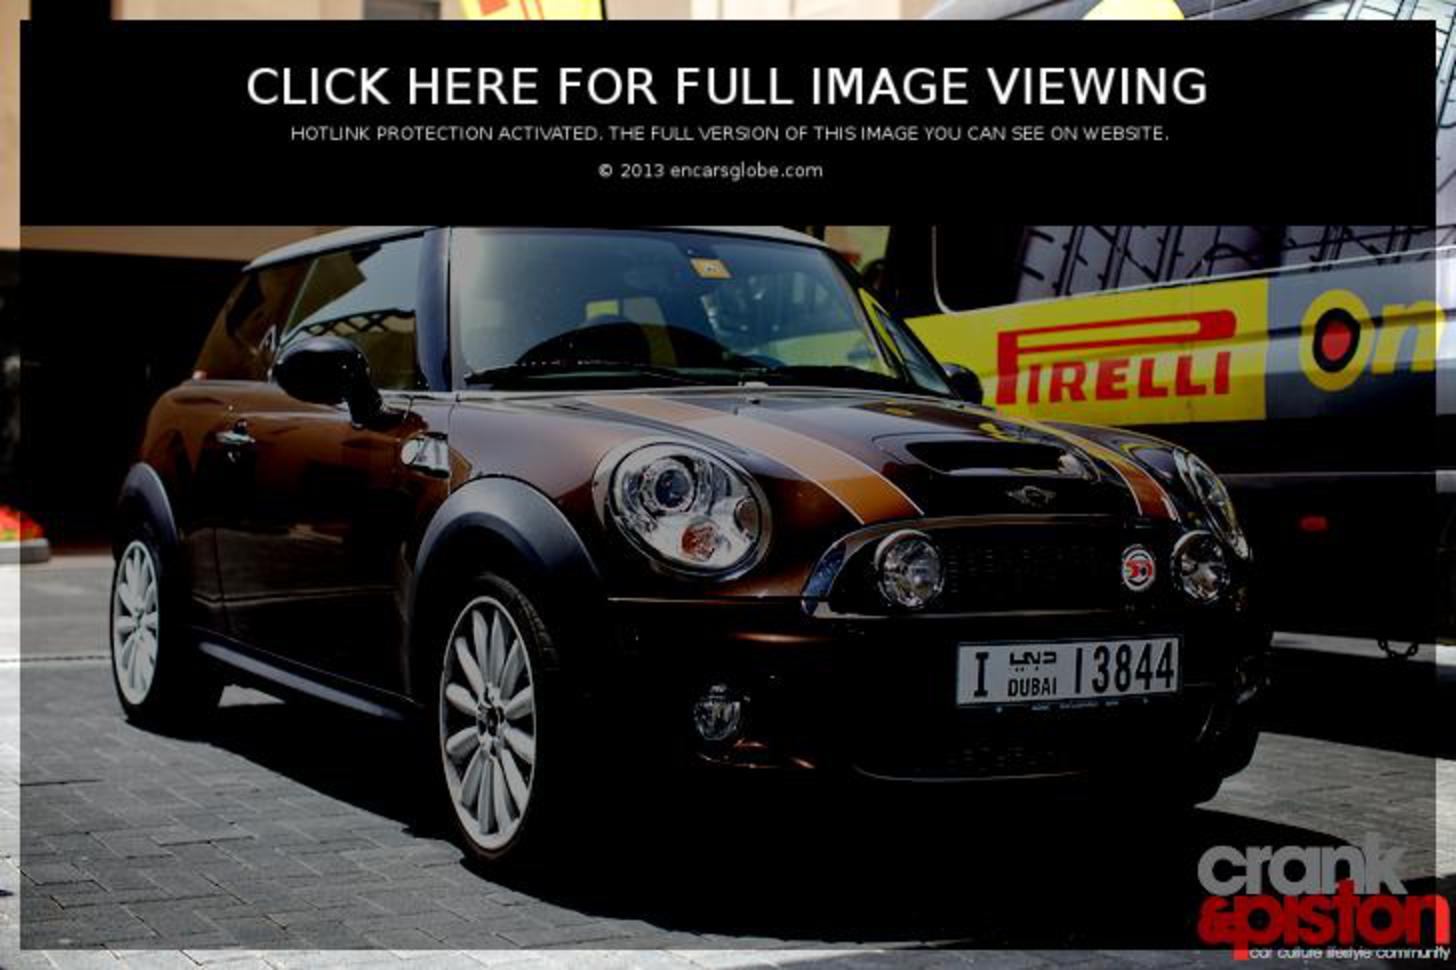 Mini Mayfair GT Photo Gallery: Photo #03 out of 7, Image Size ...